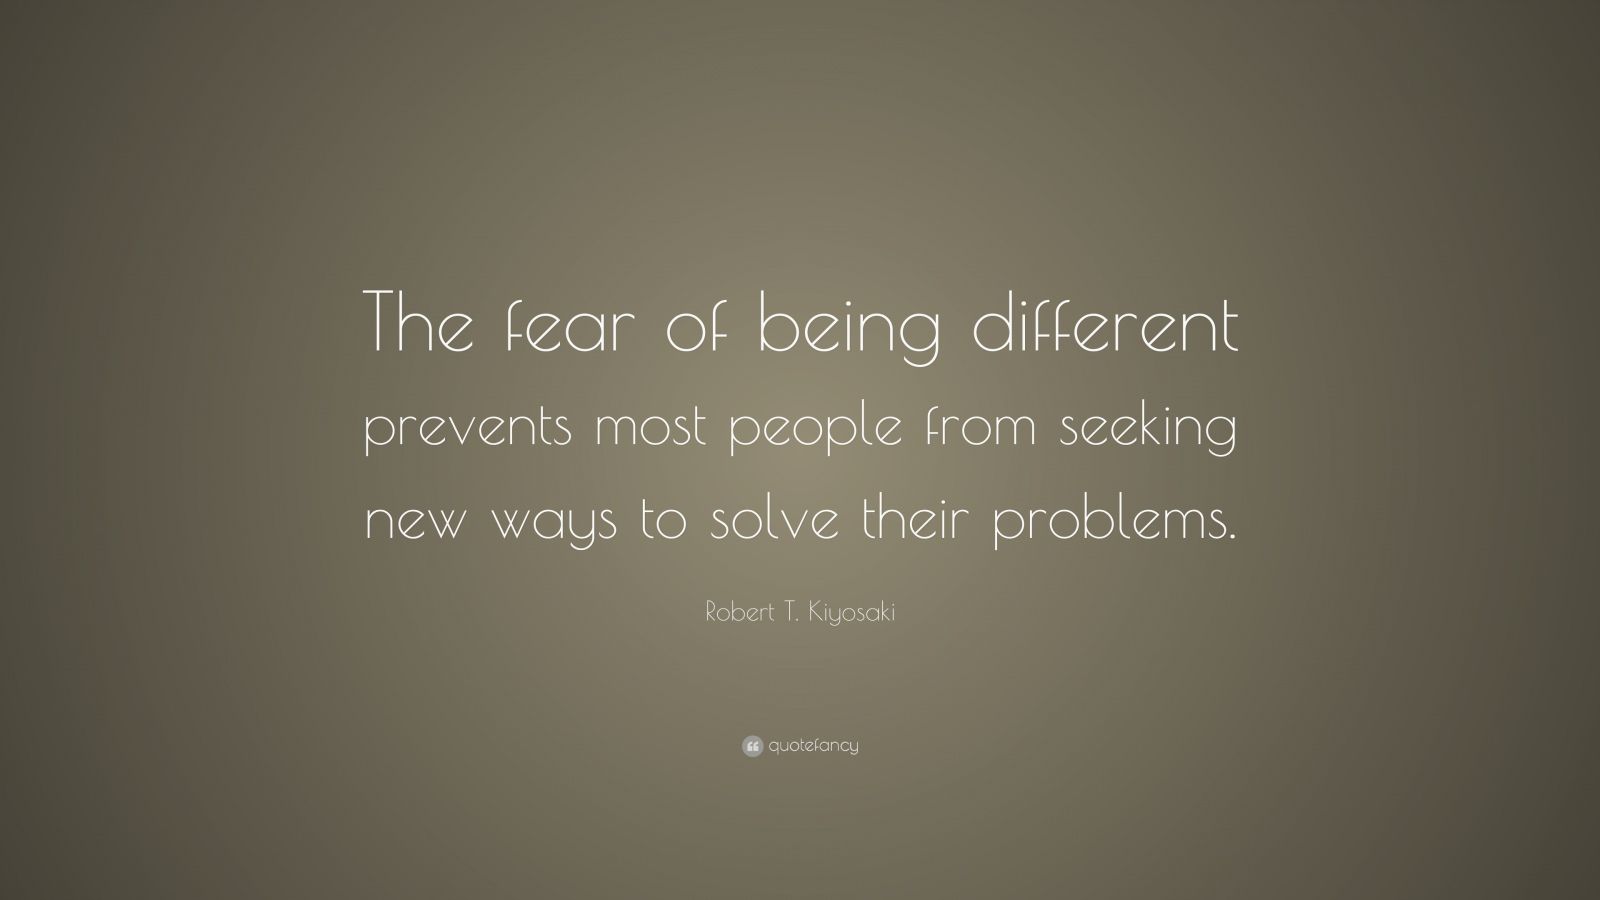 Robert T. Kiyosaki Quote: “The fear of being different prevents most